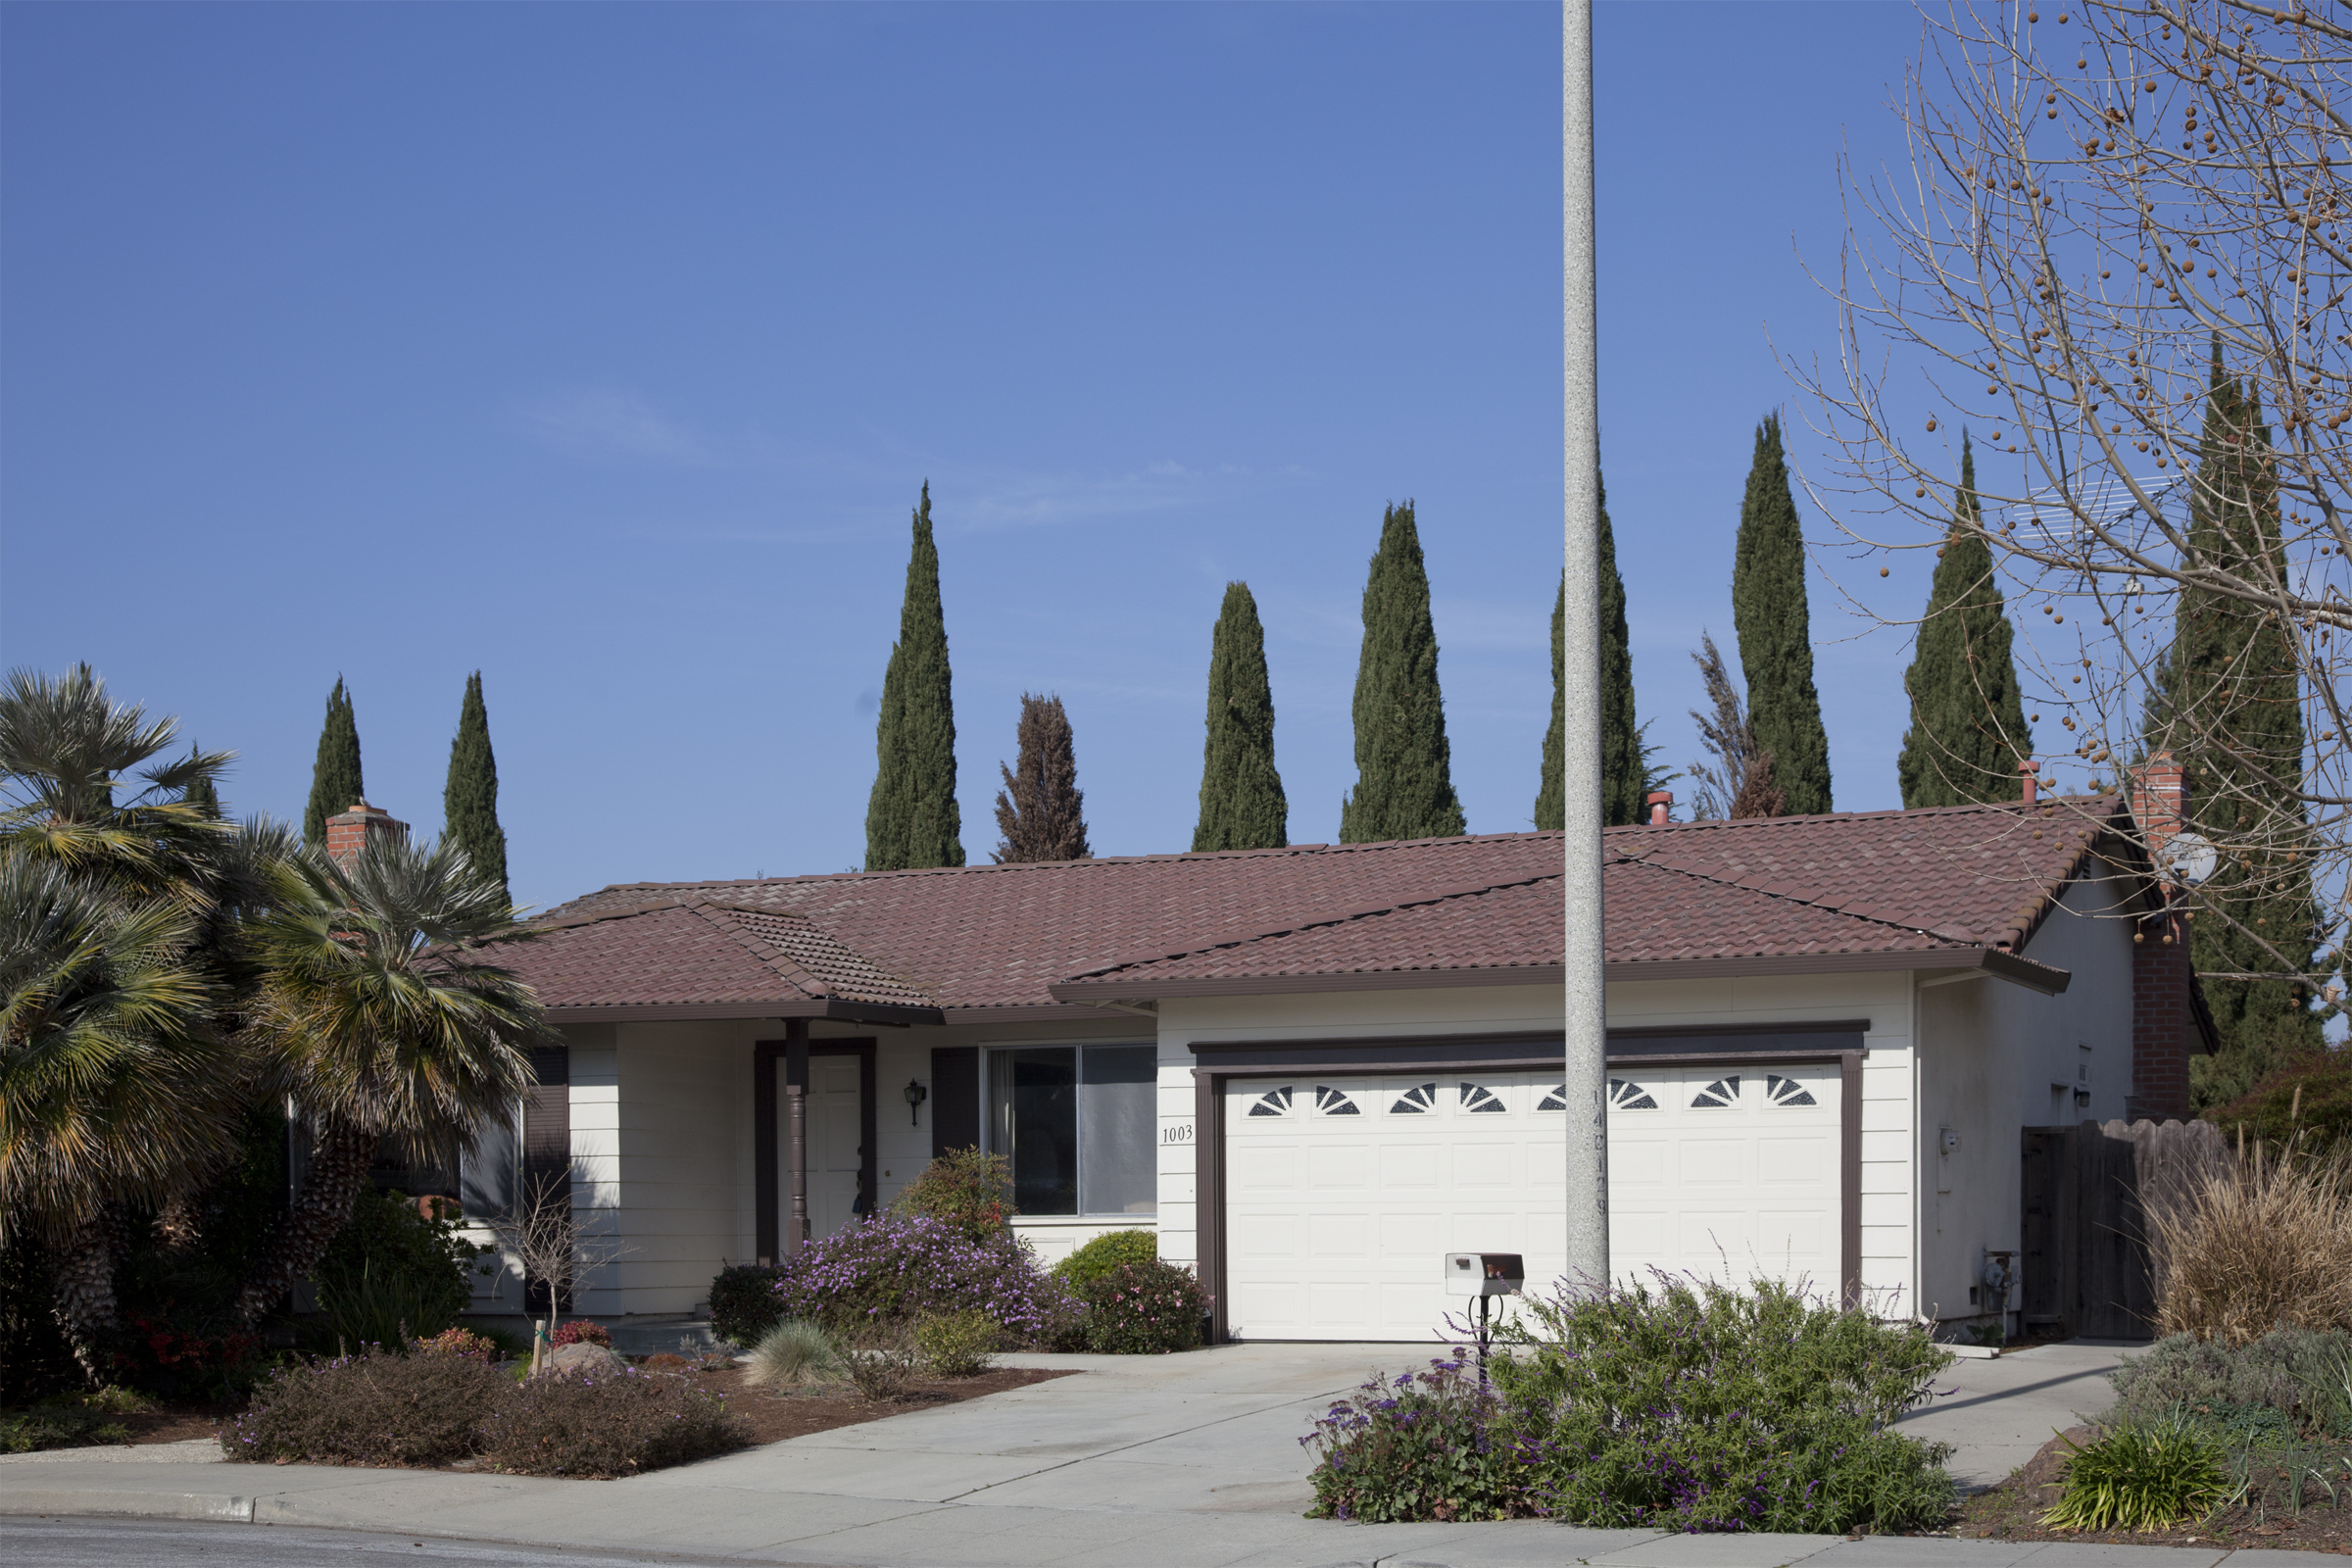 1003 Lupine Dr, Sunnyvale 94086 - Lupine Dr 1003 